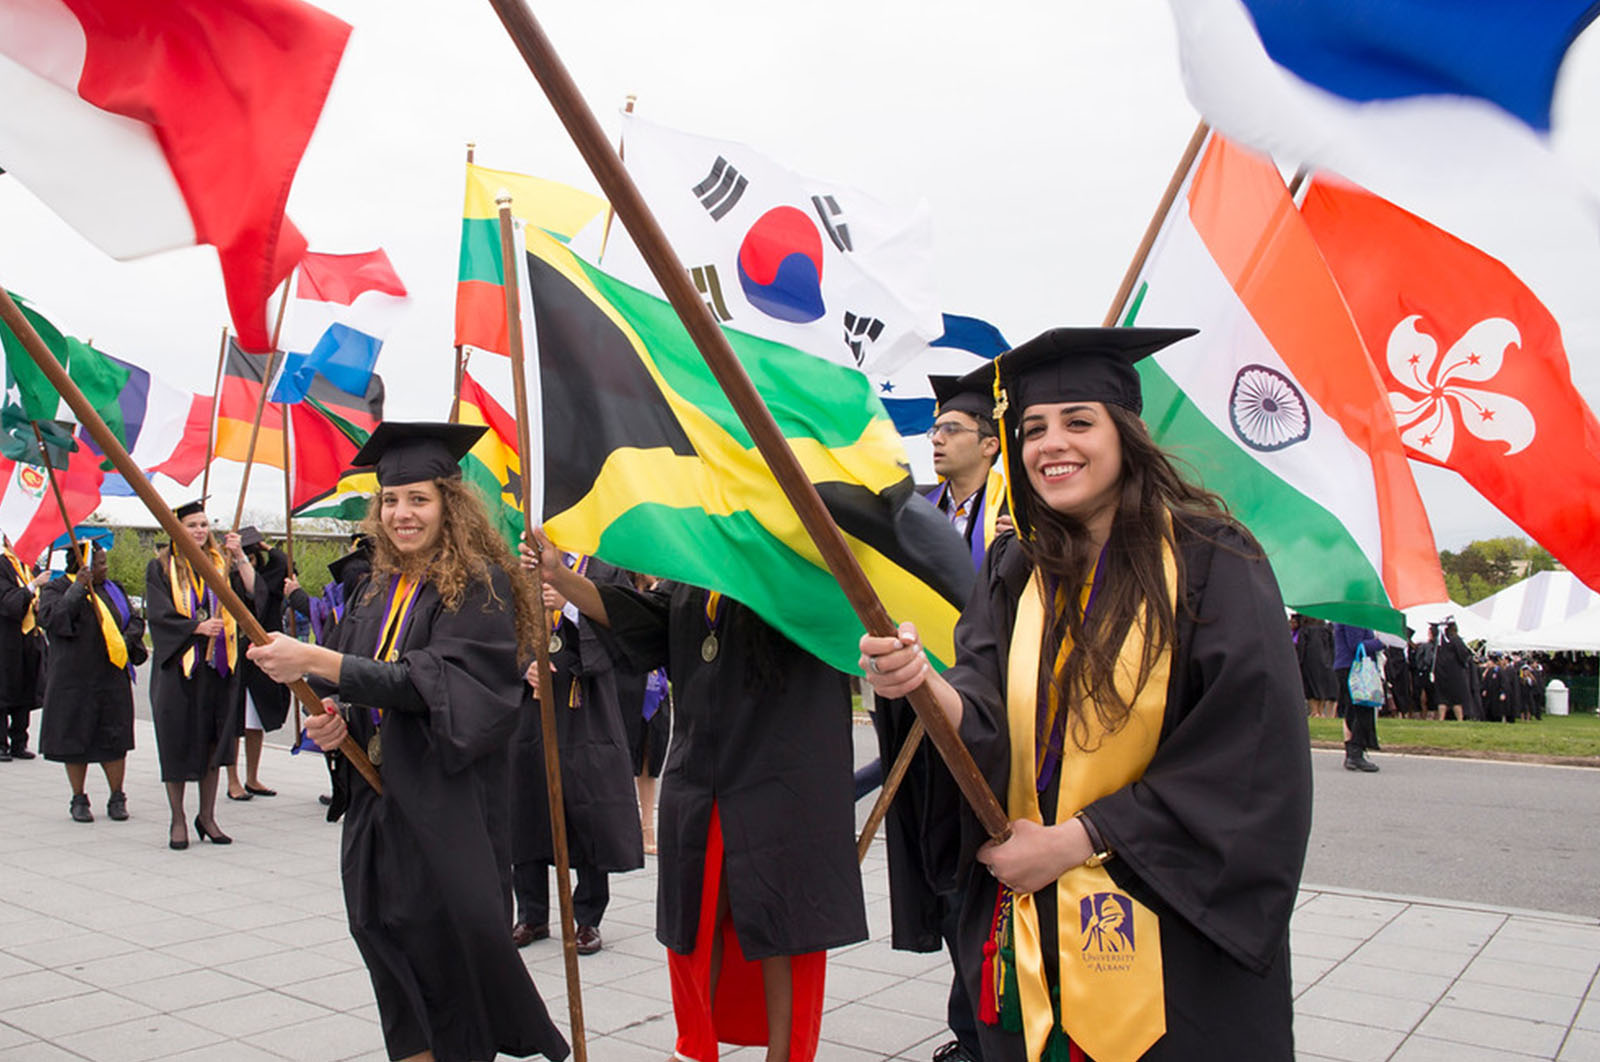 Students holding flags at commencement